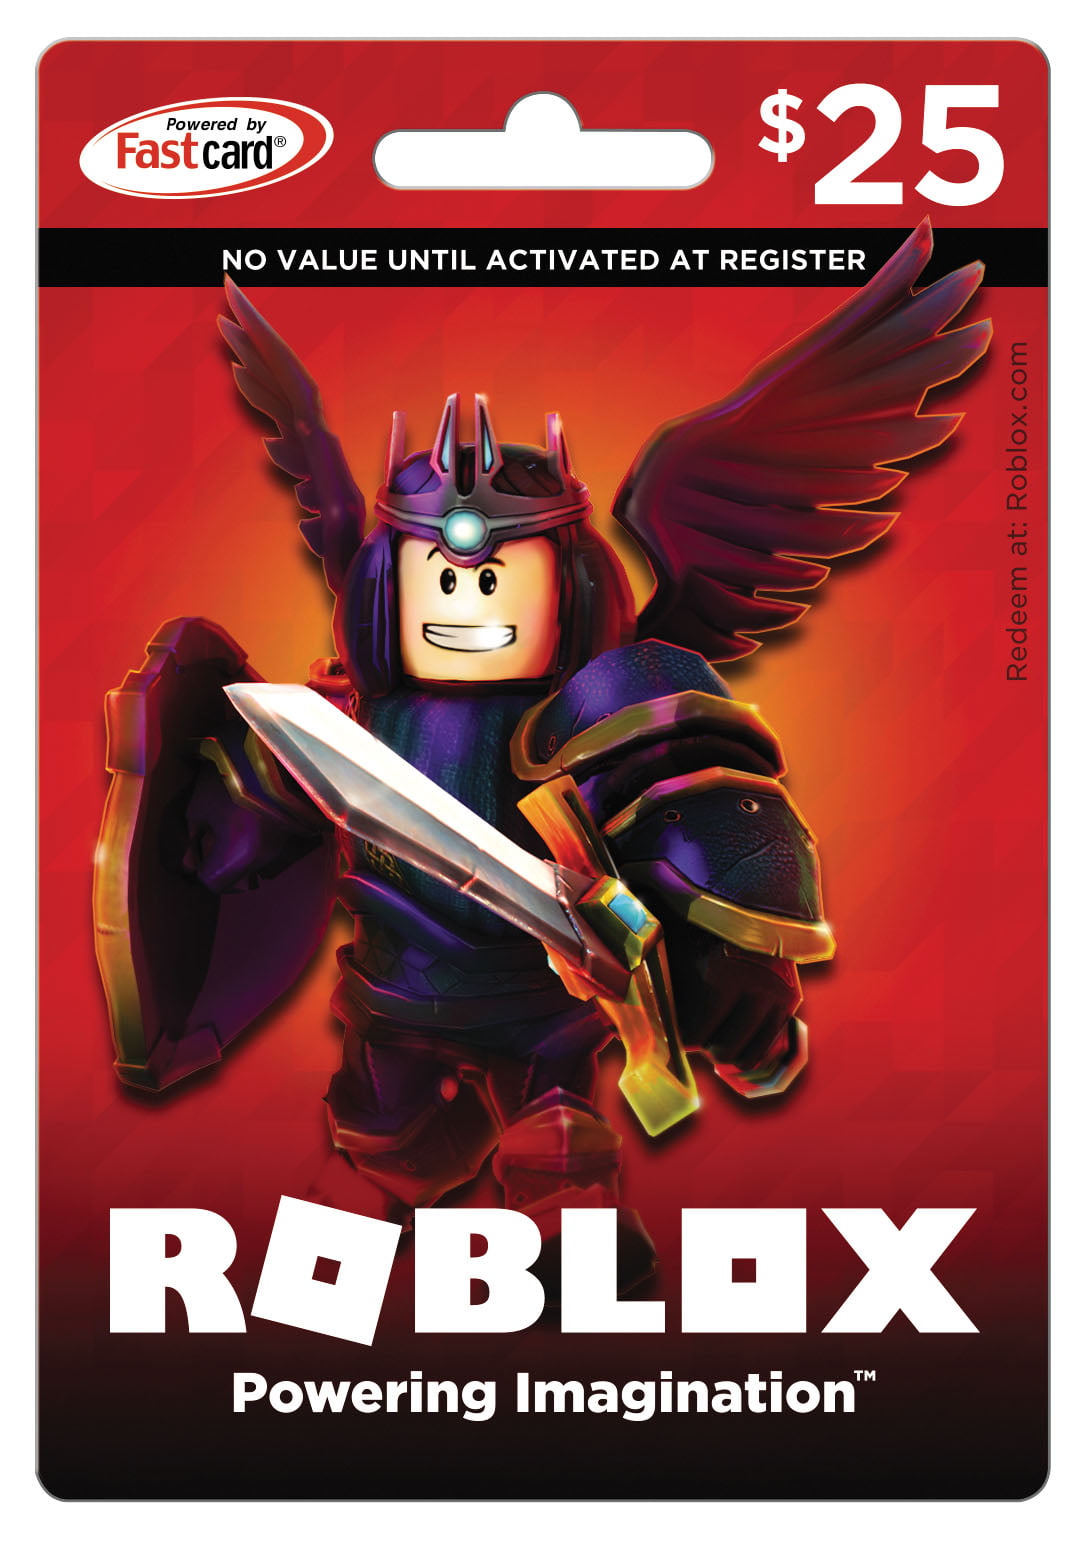 Where Can I Get A Robux Gift Card